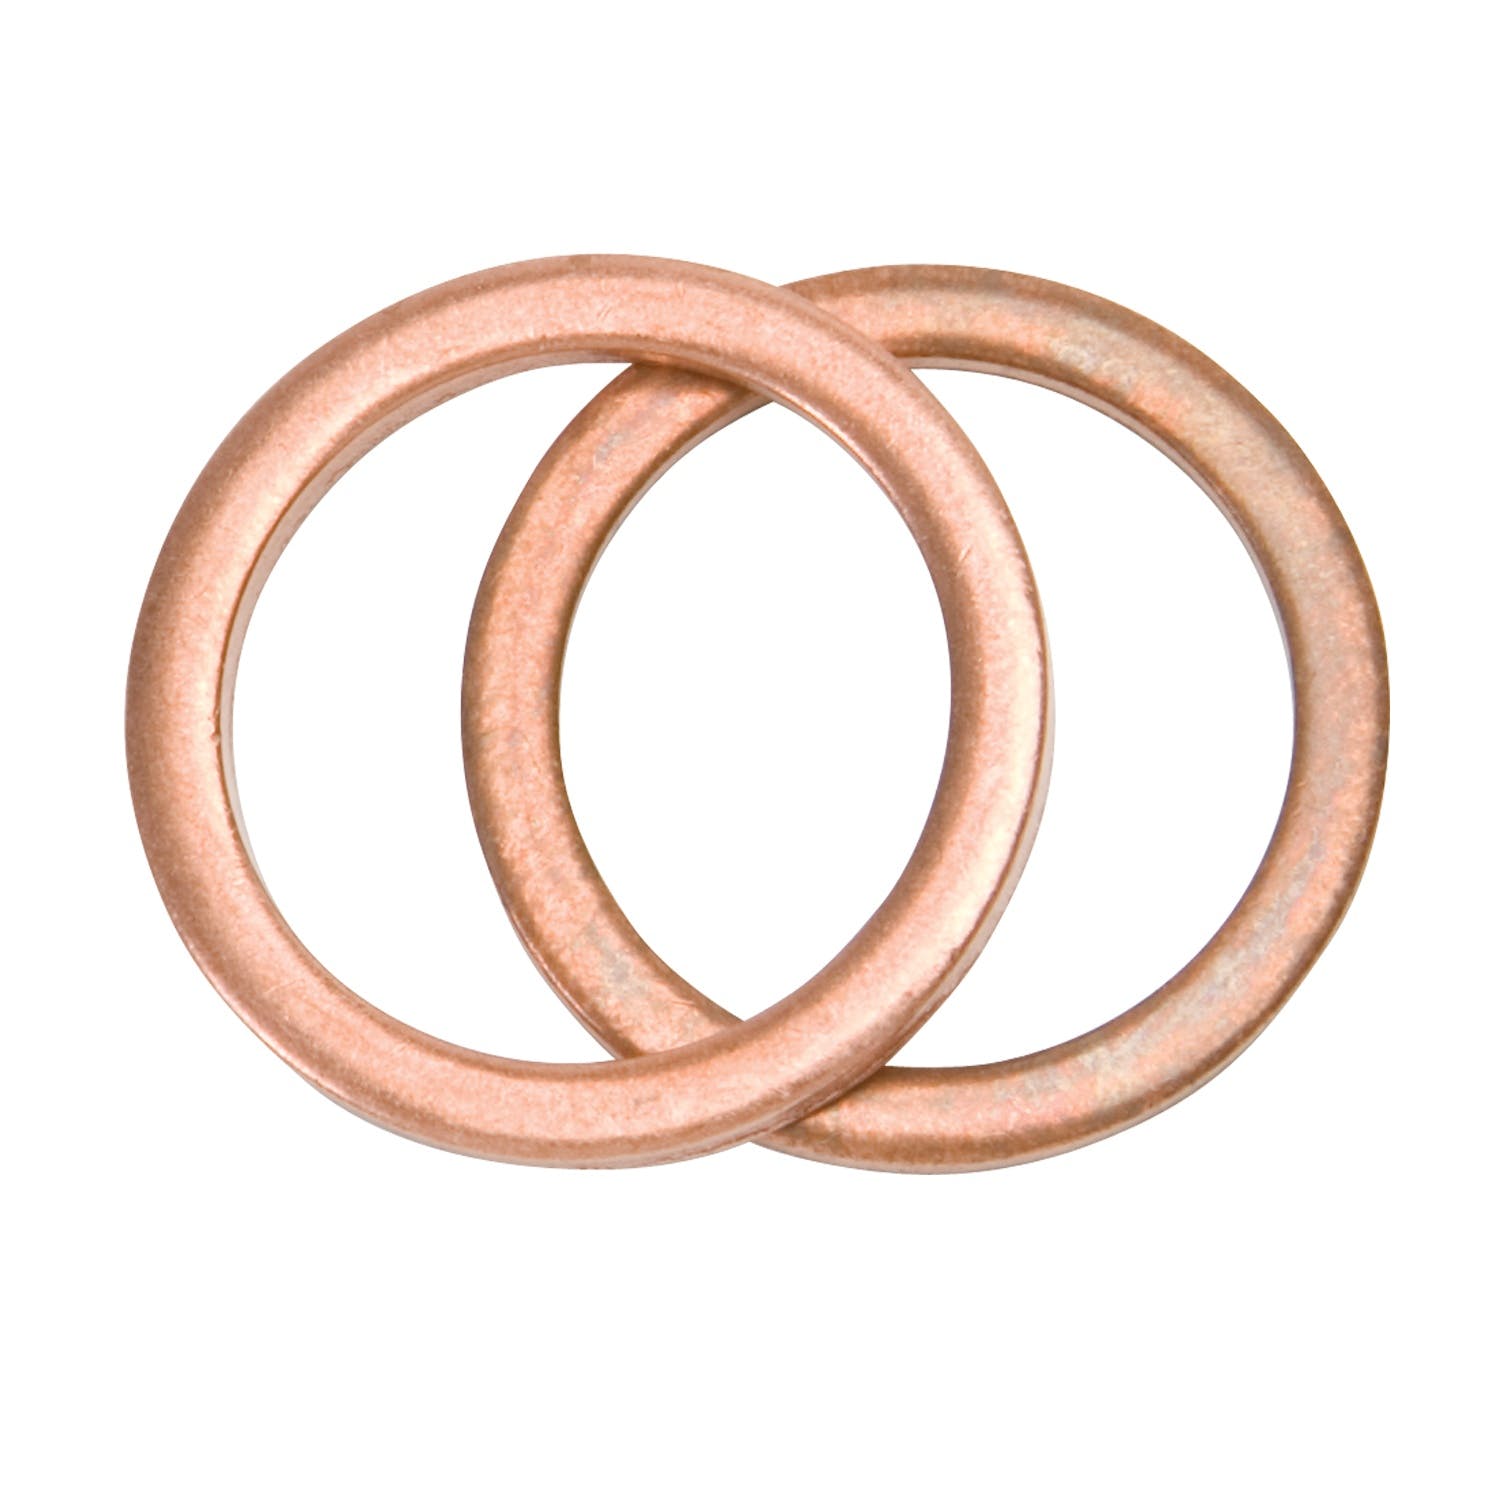 Russell 640990 Washer Copper Crush For Use with 5/8 inch-18 Male 2 pk